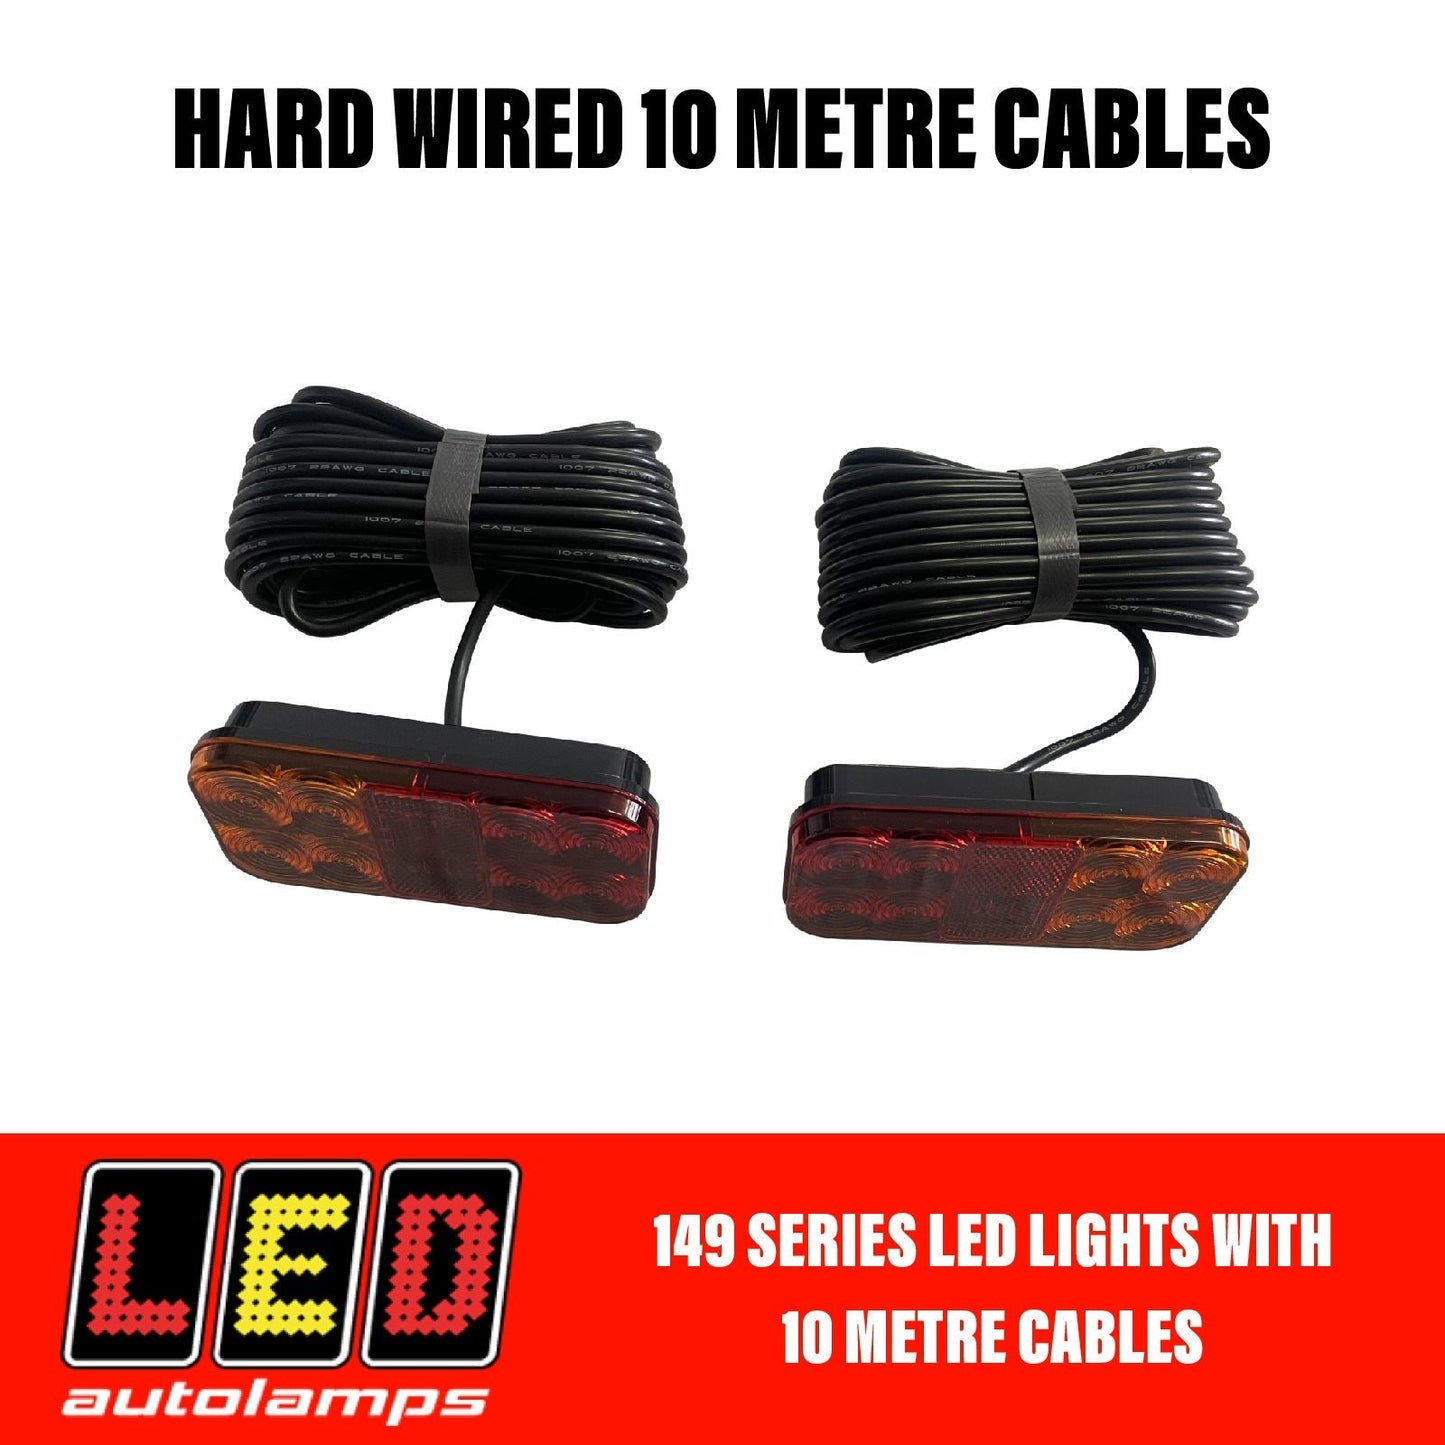 LED AUTOLAMPS 149 SERIES LIGHTS with 10 Metre Cables